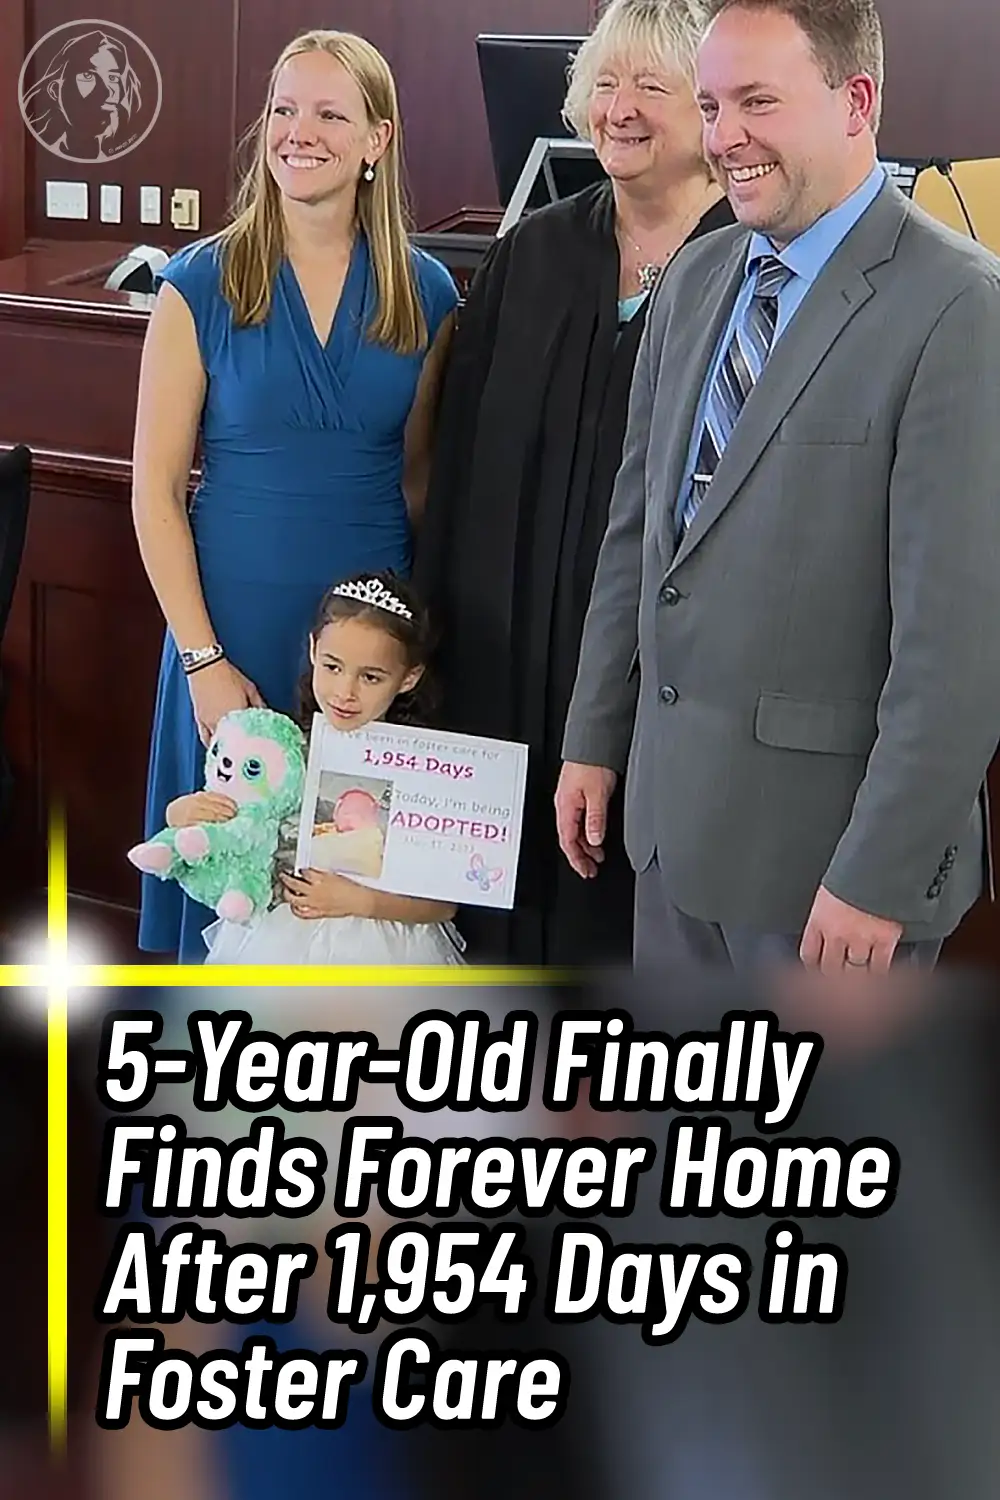 5-Year-Old Finally Finds Forever Home After 1,954 Days in Foster Care